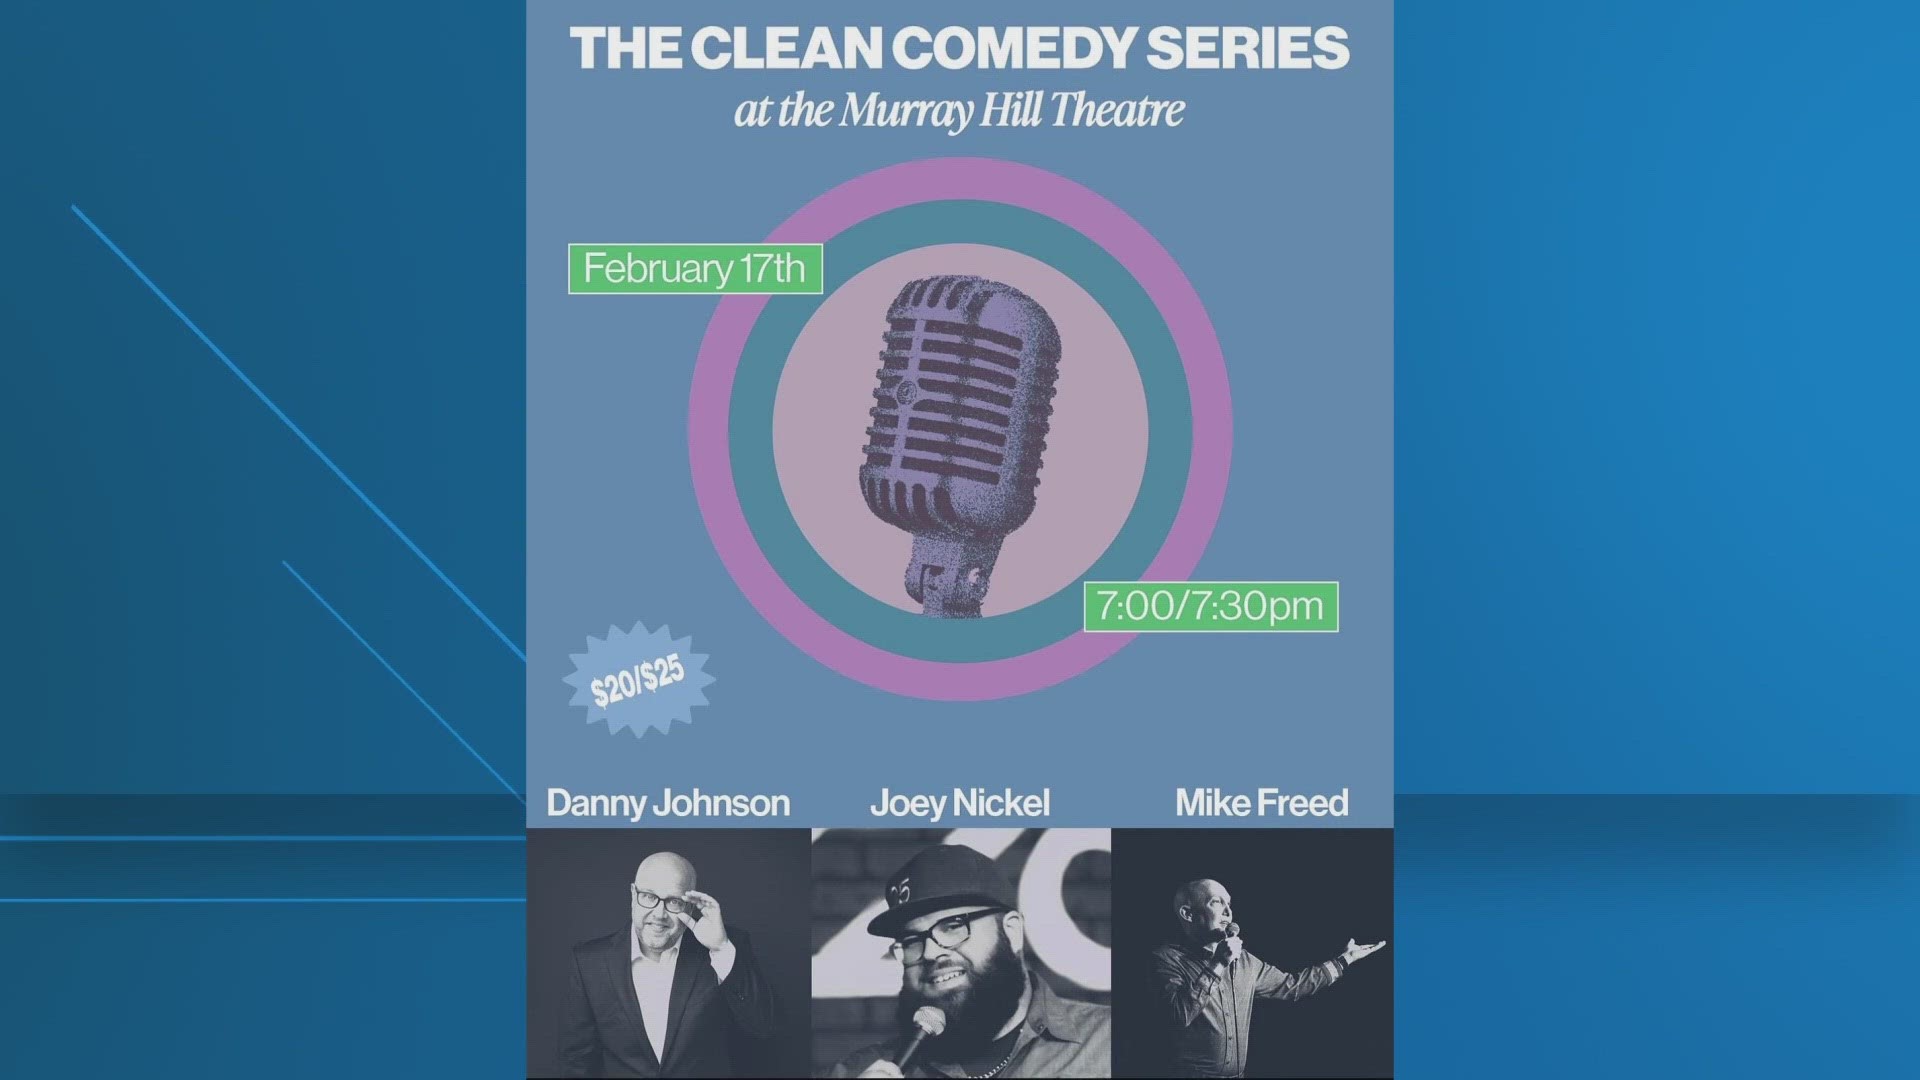 The show will feature comics Danny Johnson, Joey Nickel and Mike Freed. The show is set for Feb. 17 starting at 7 p.m.